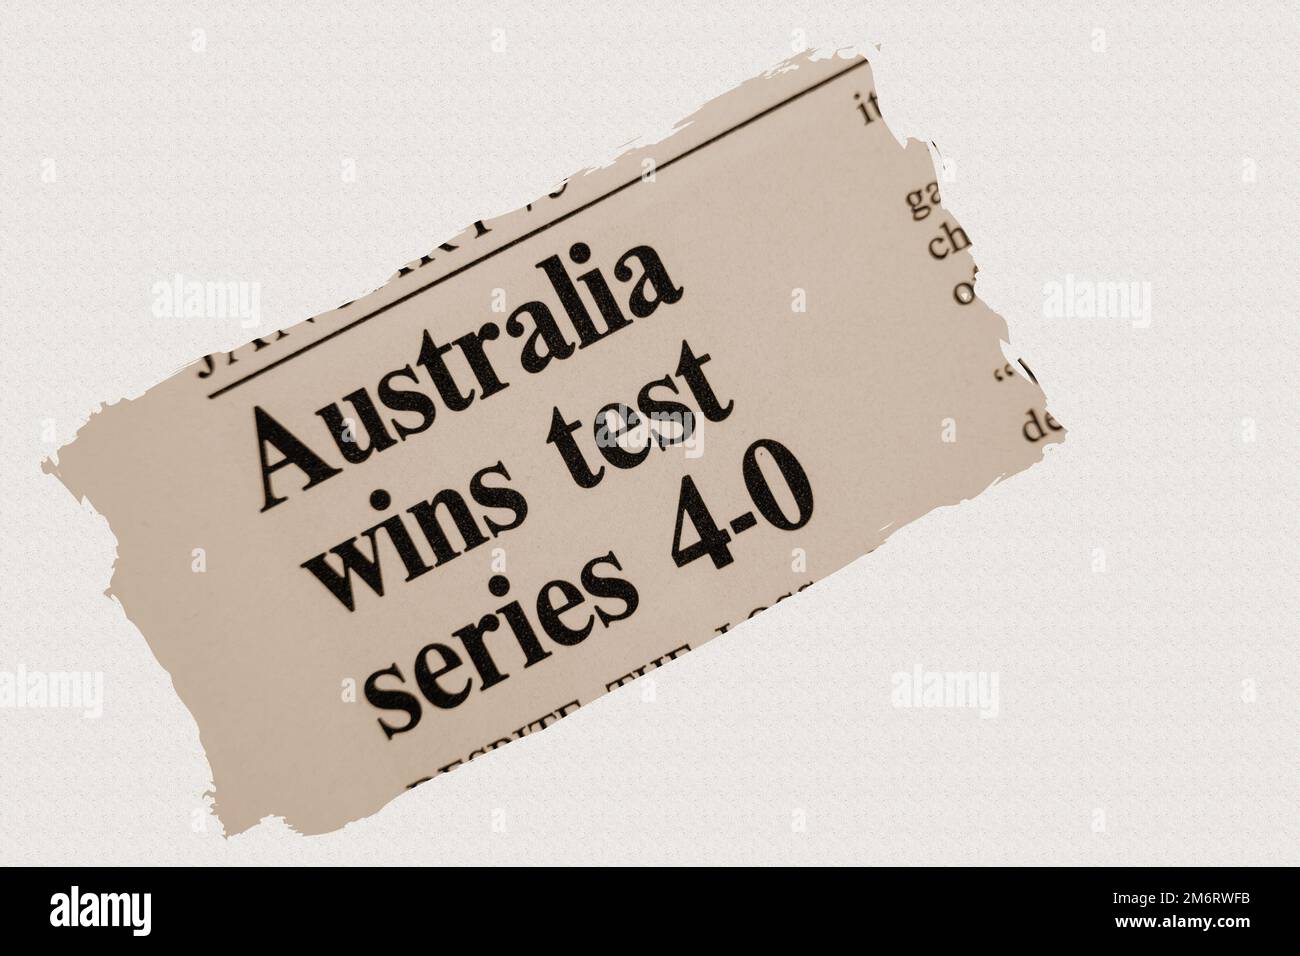 news story from 1975 newspaper headline article title - Australia wins test series 4-0 in sepia Stock Photo